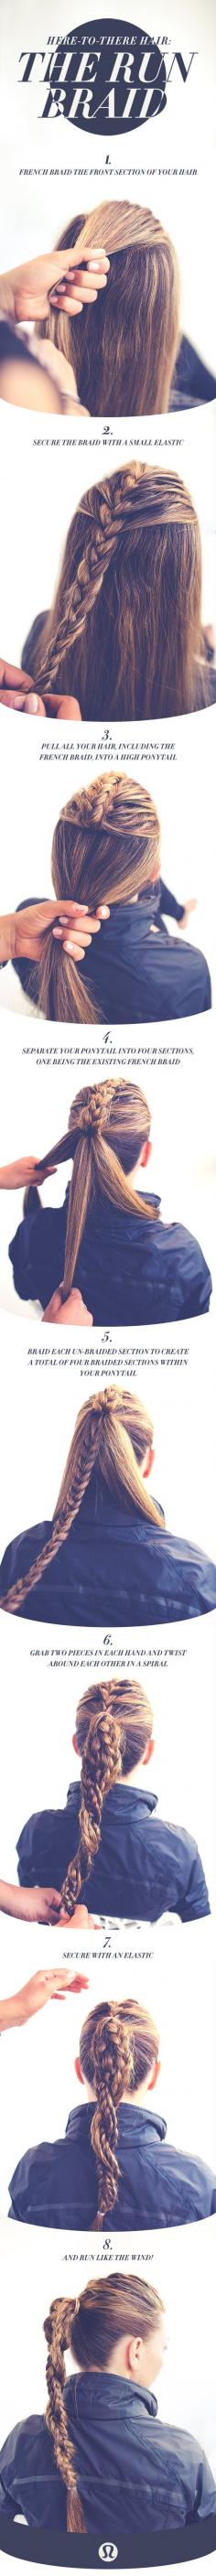 Here-to-there hair: Watch and learn how to create the perfect run braid